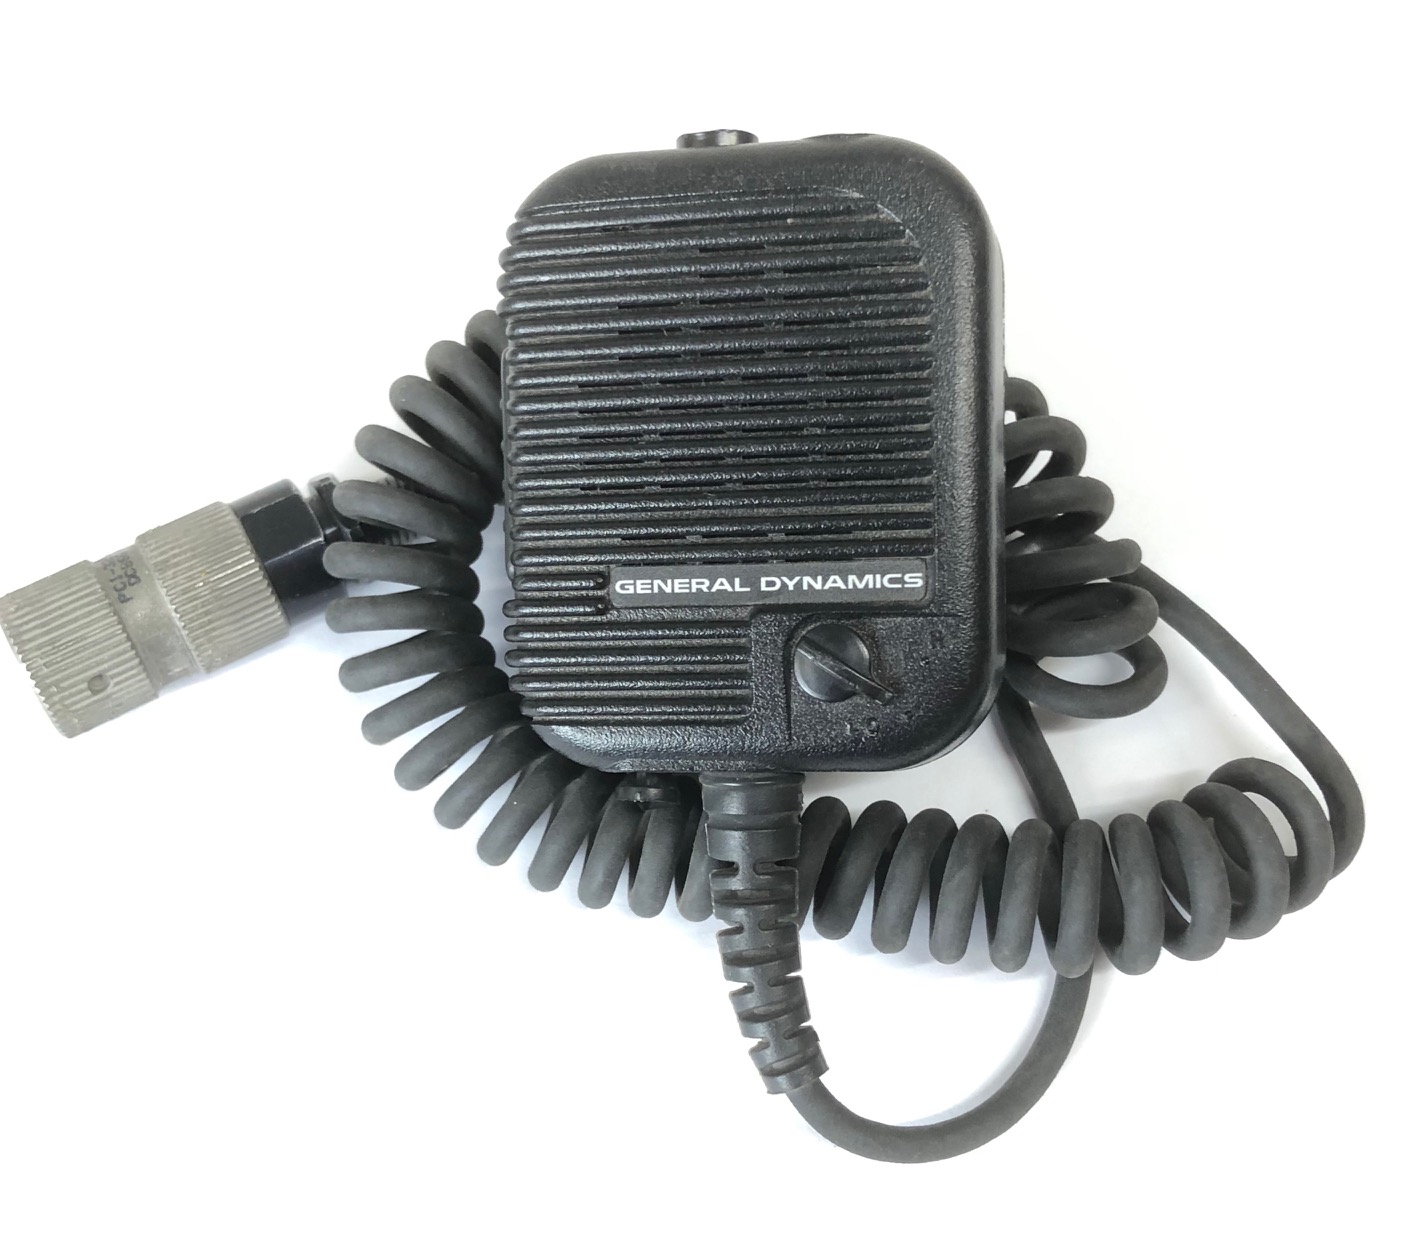 Military Speaker Microphone Otto/Thales for MBITR 